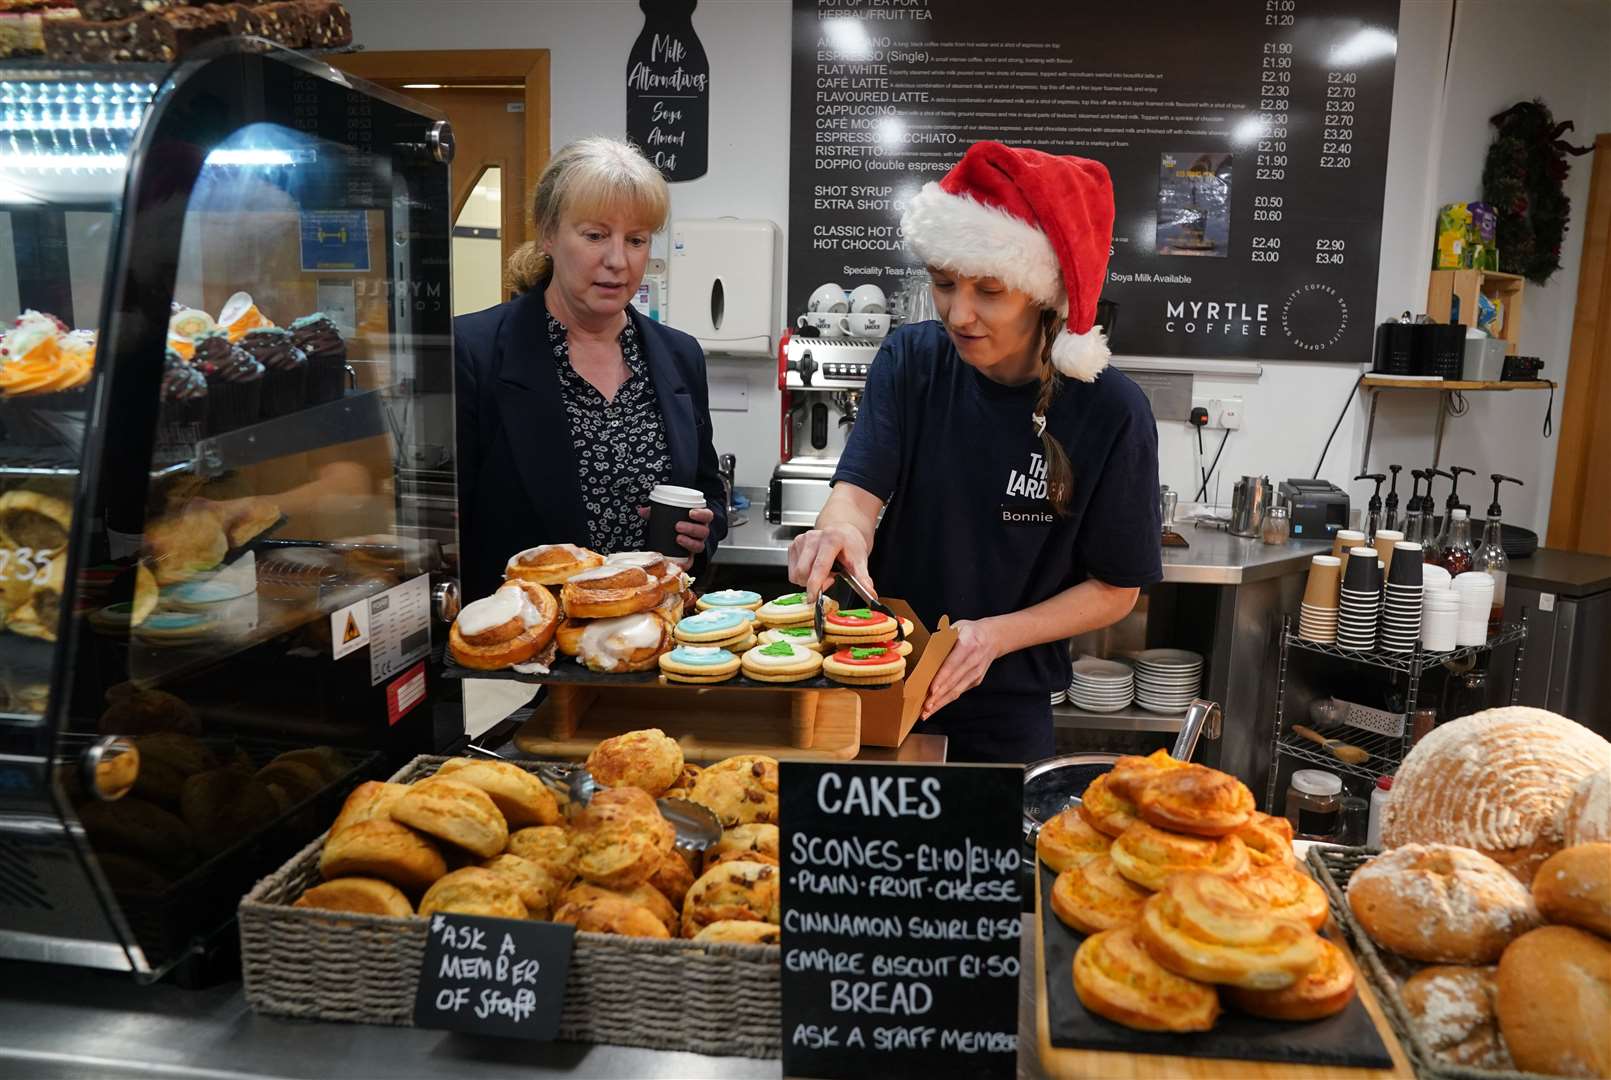 Shona Robison, the Scottish Deputy First Minister and Finance Secretary, hit back at Mr Sunak during a visit to a community cafe ahead of Tuesday’s Scottish budget (Andrew Milligan/PA)